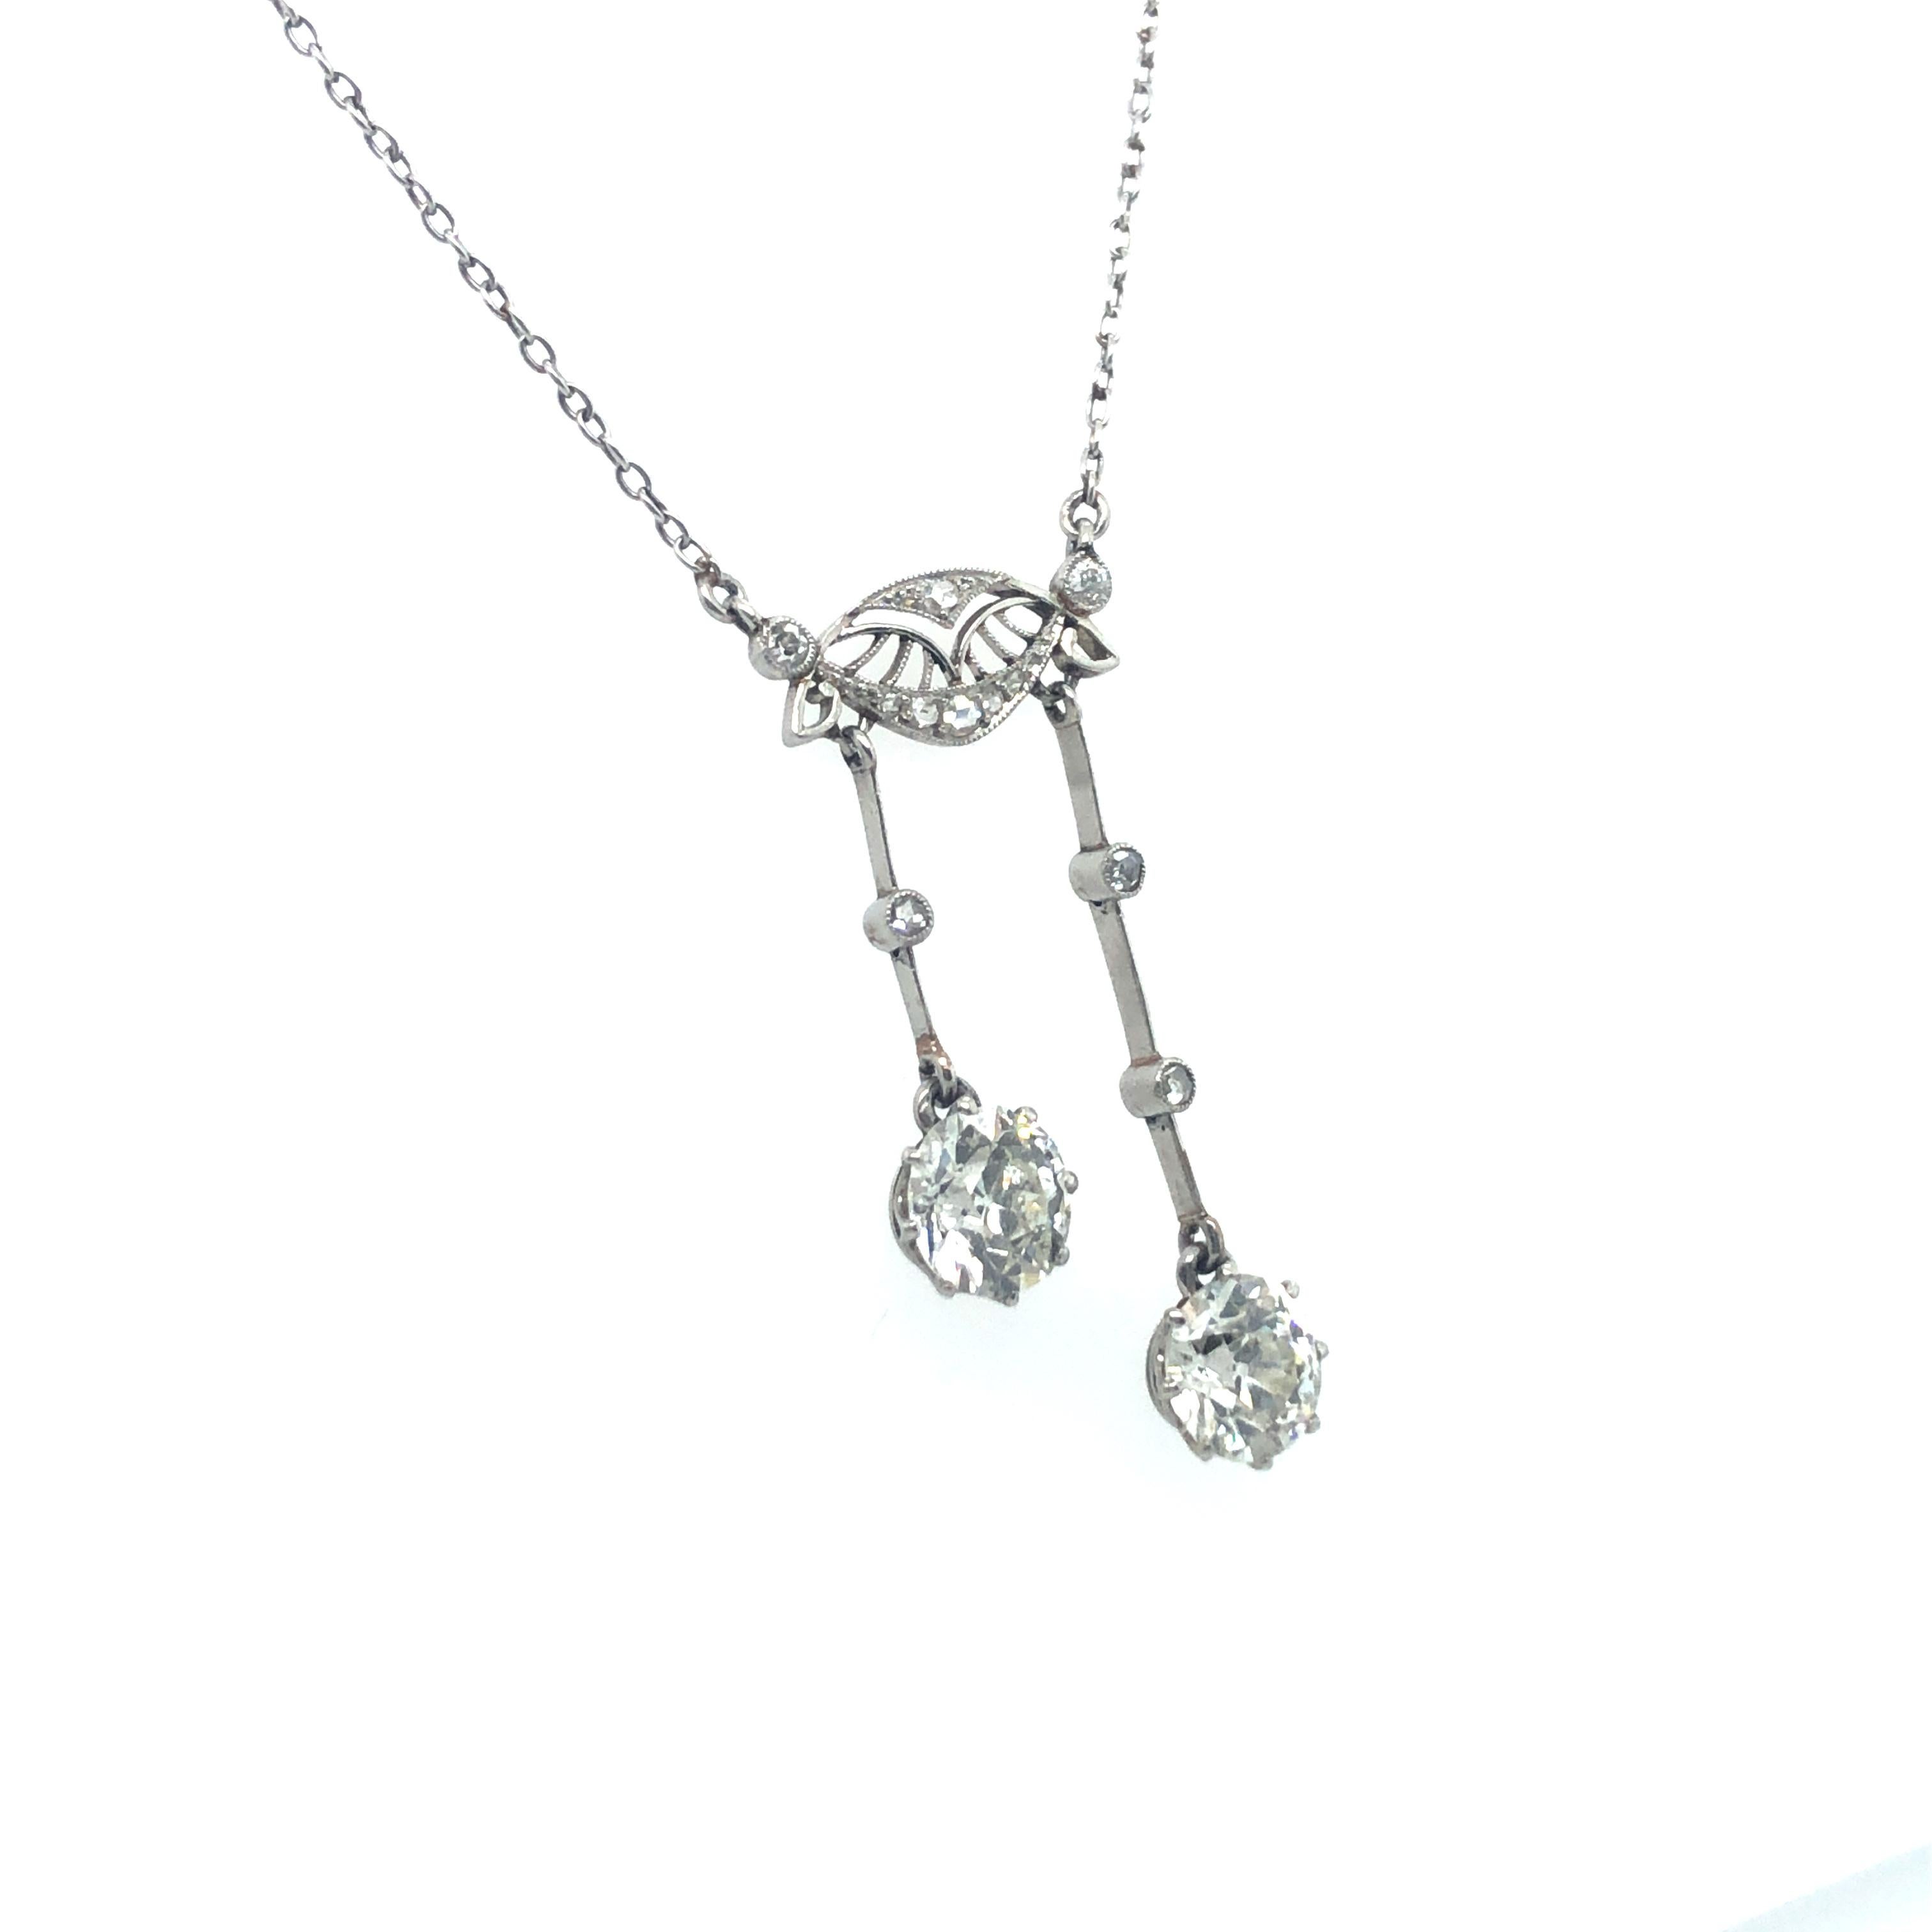 This beautiful Belle Époque négligée necklace enchants with its delicate and elegant playfulness.
Two old European cut diamonds of J/K colour and vs clarity with a total weight of approximately 2.10 carats swing from a finely pierced central section